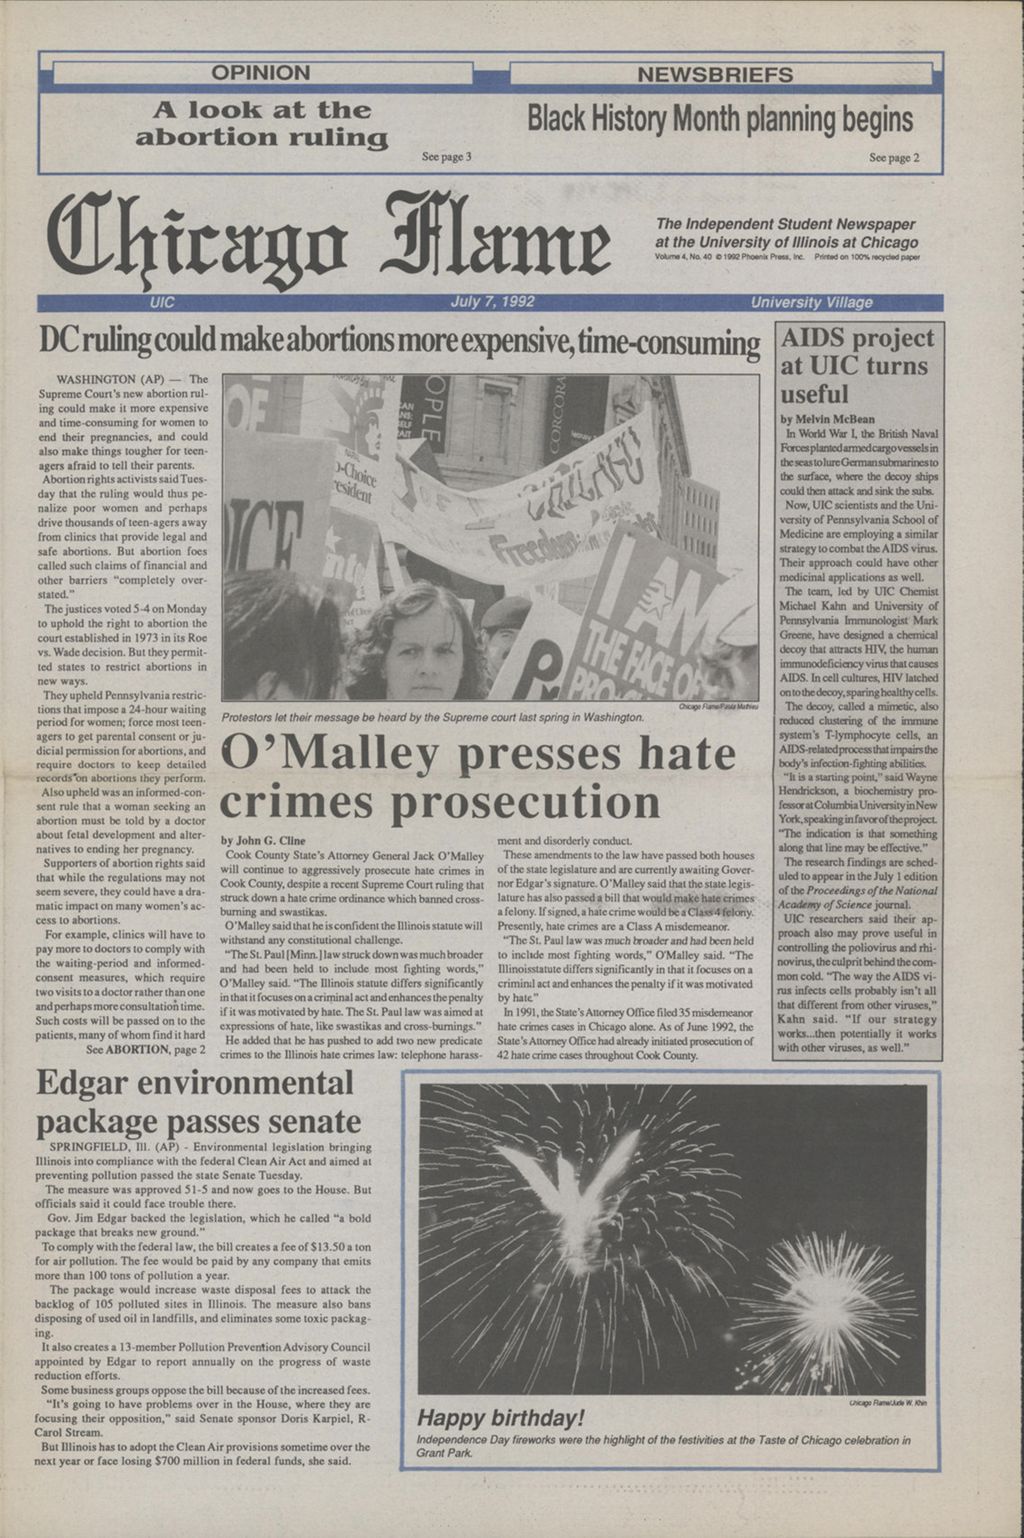 Chicago Flame (July 7, 1992)